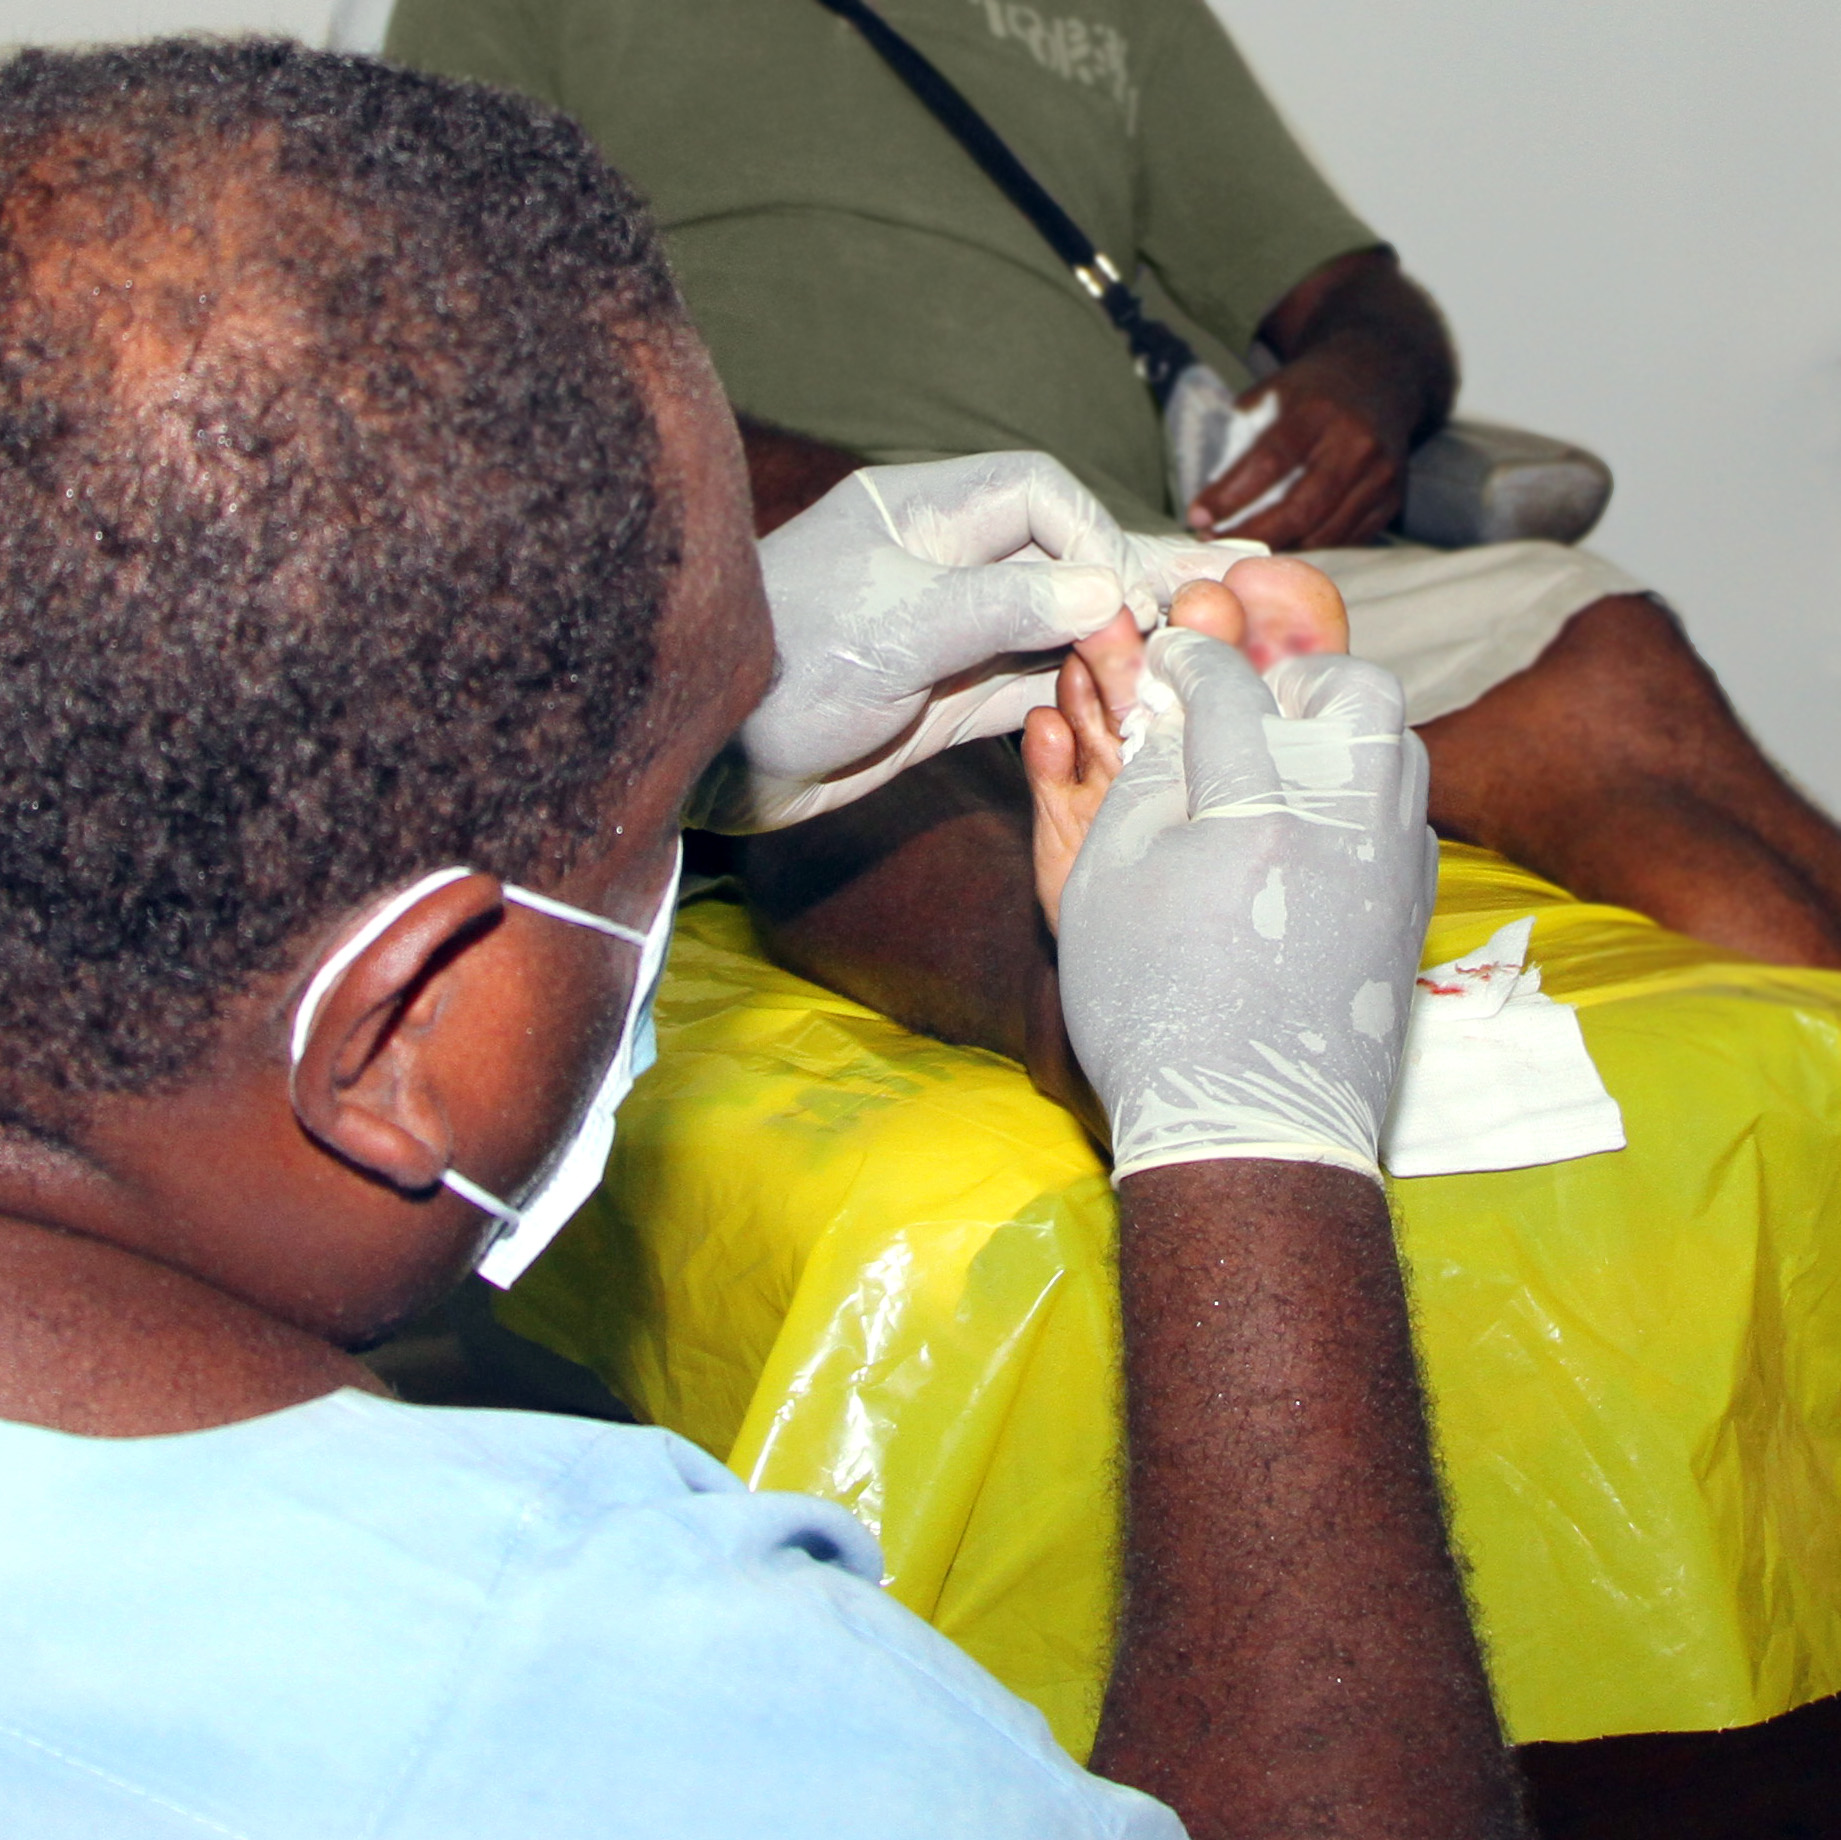 A health worker wearing gloves and a facemask cleans a man's foot wounds.